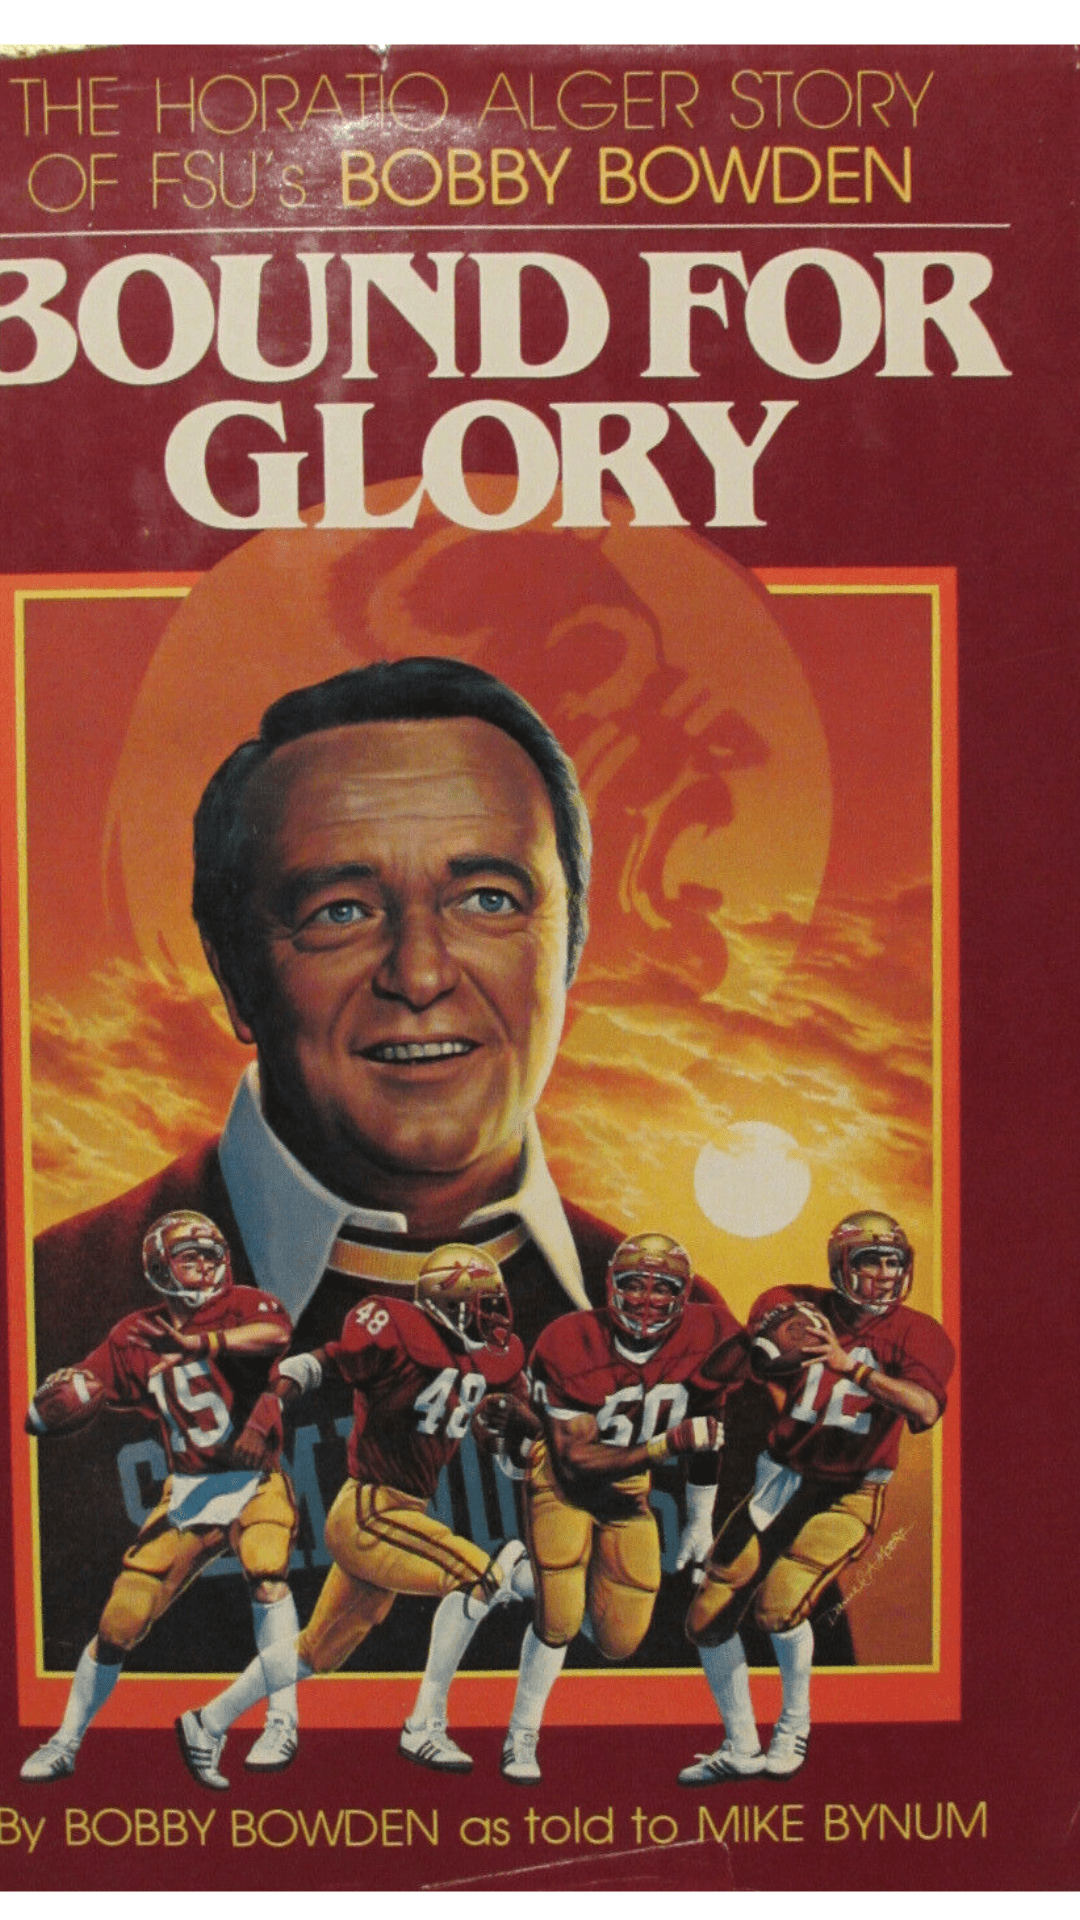 Bound for Glory: The Horatio Alger Story of FSU's Bobby Bowden